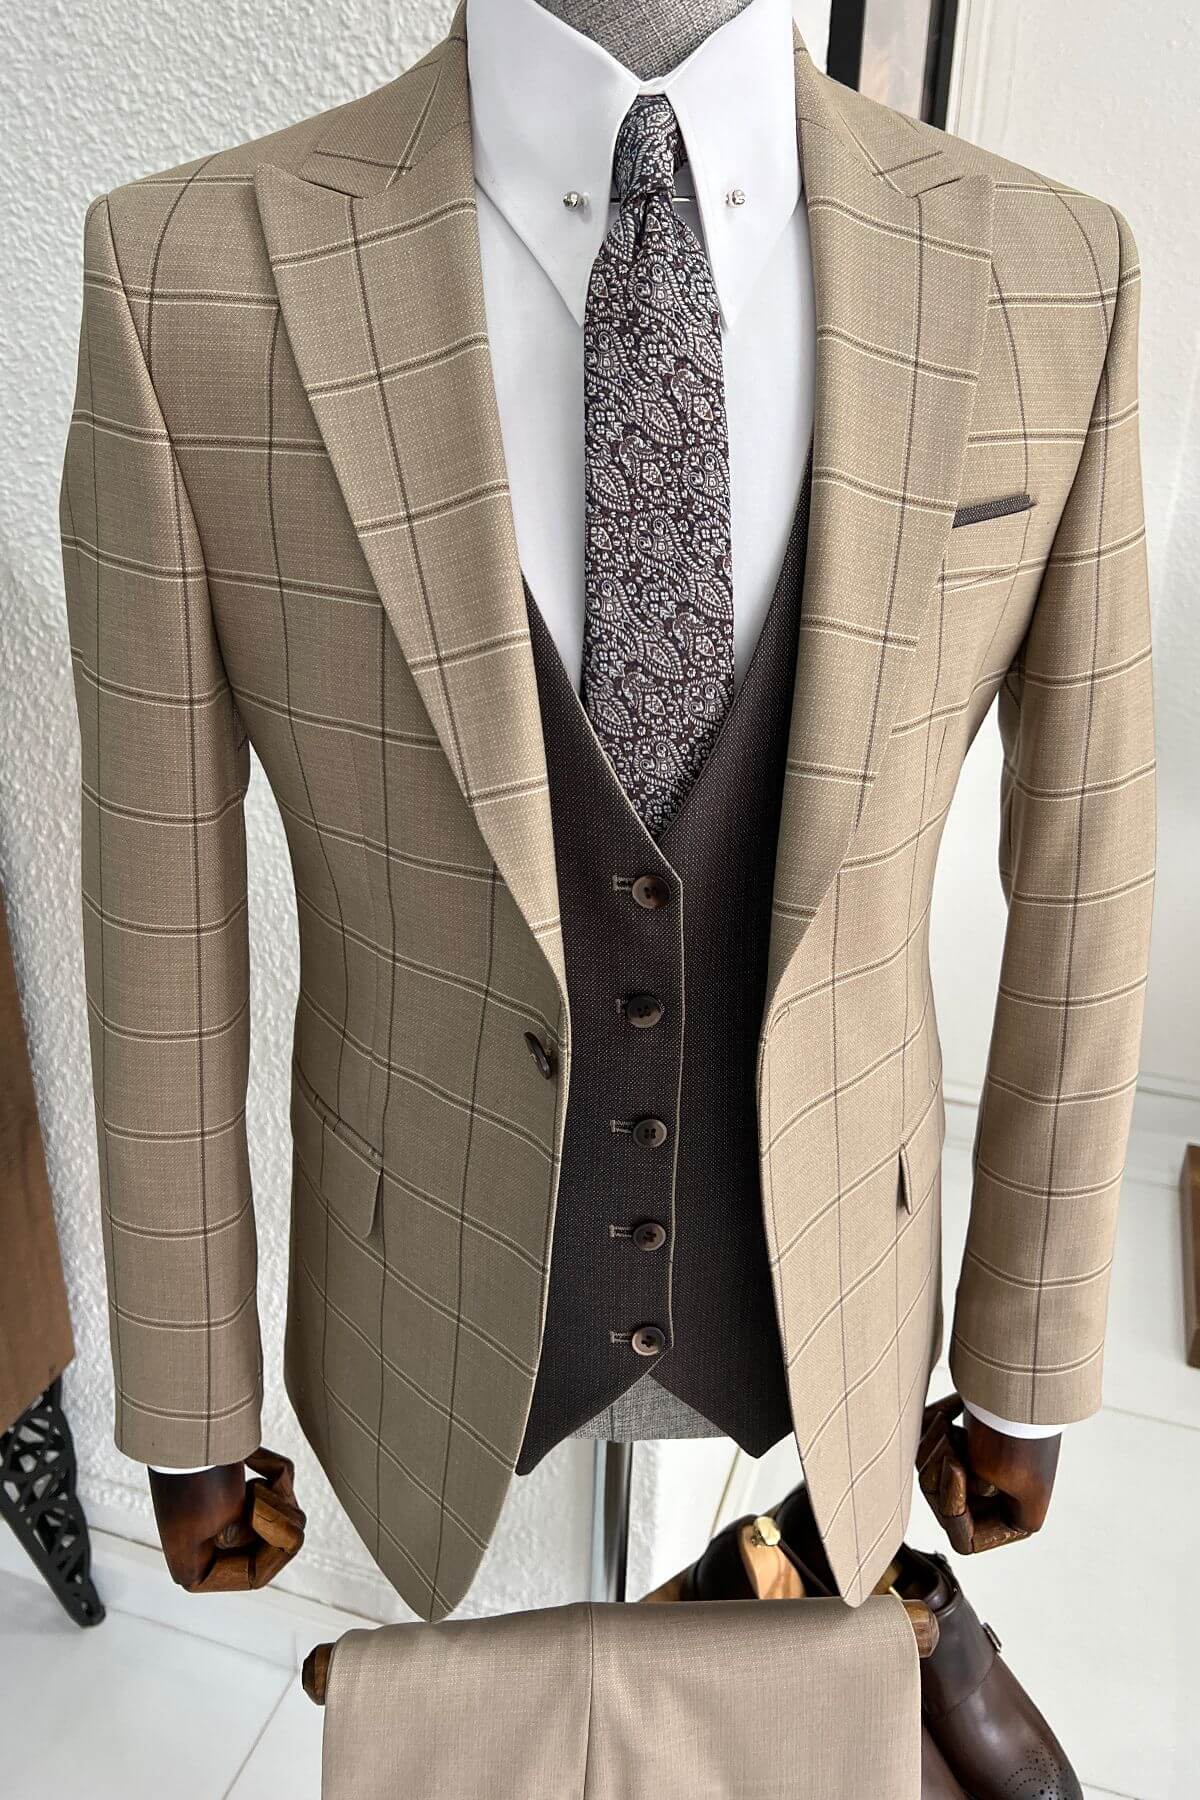 A Beige and Brown Wool Suit on display